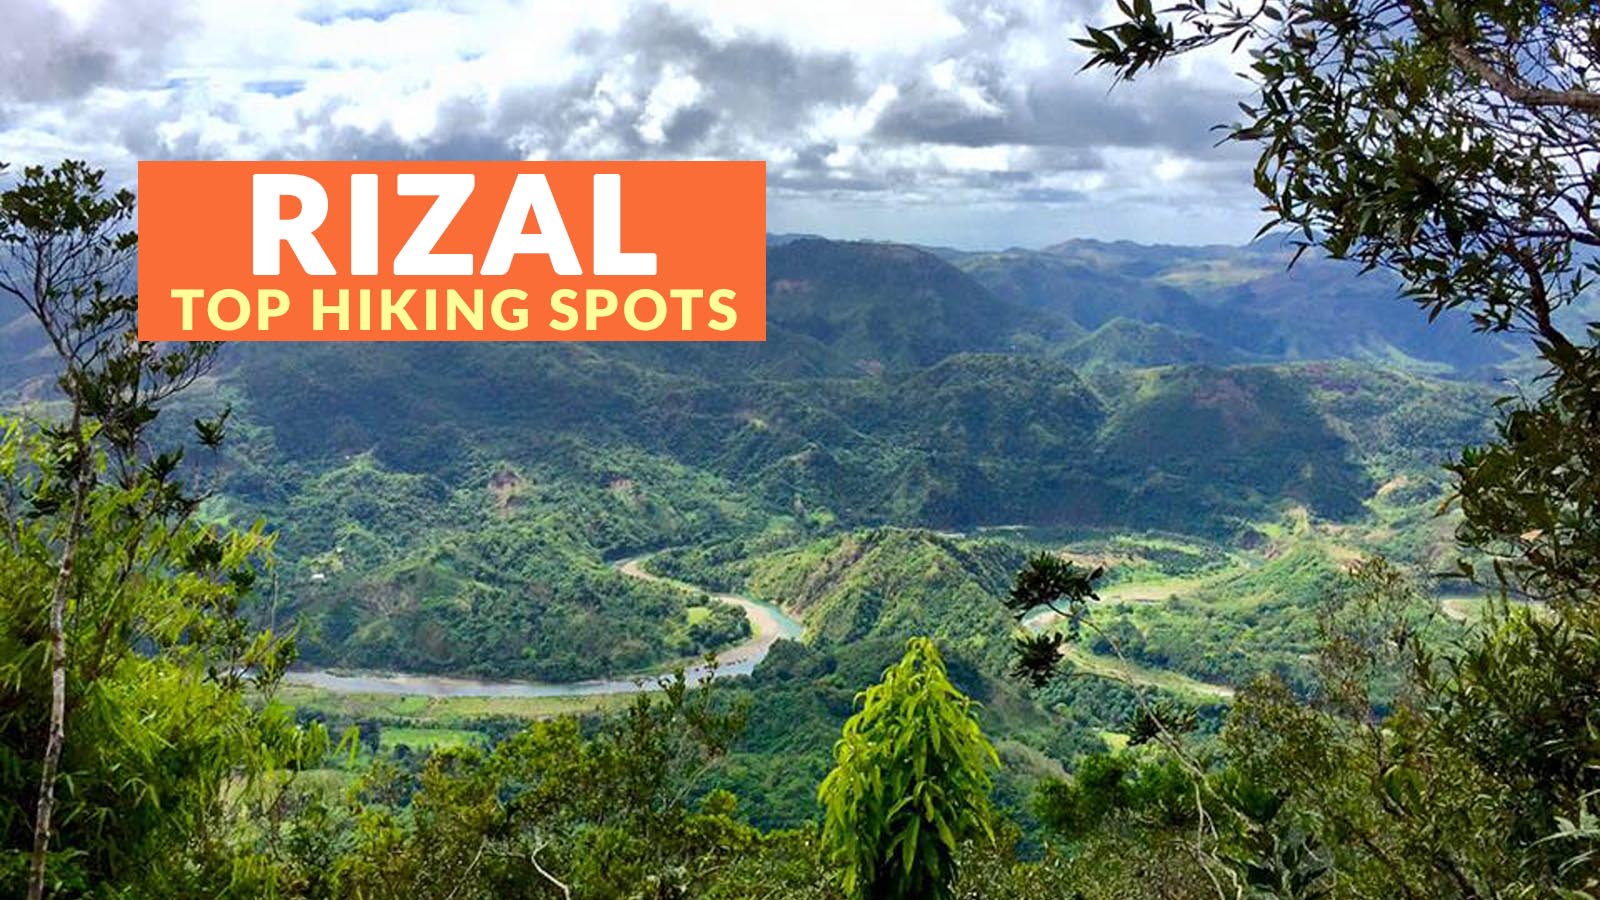 taytay rizal tourist attractions